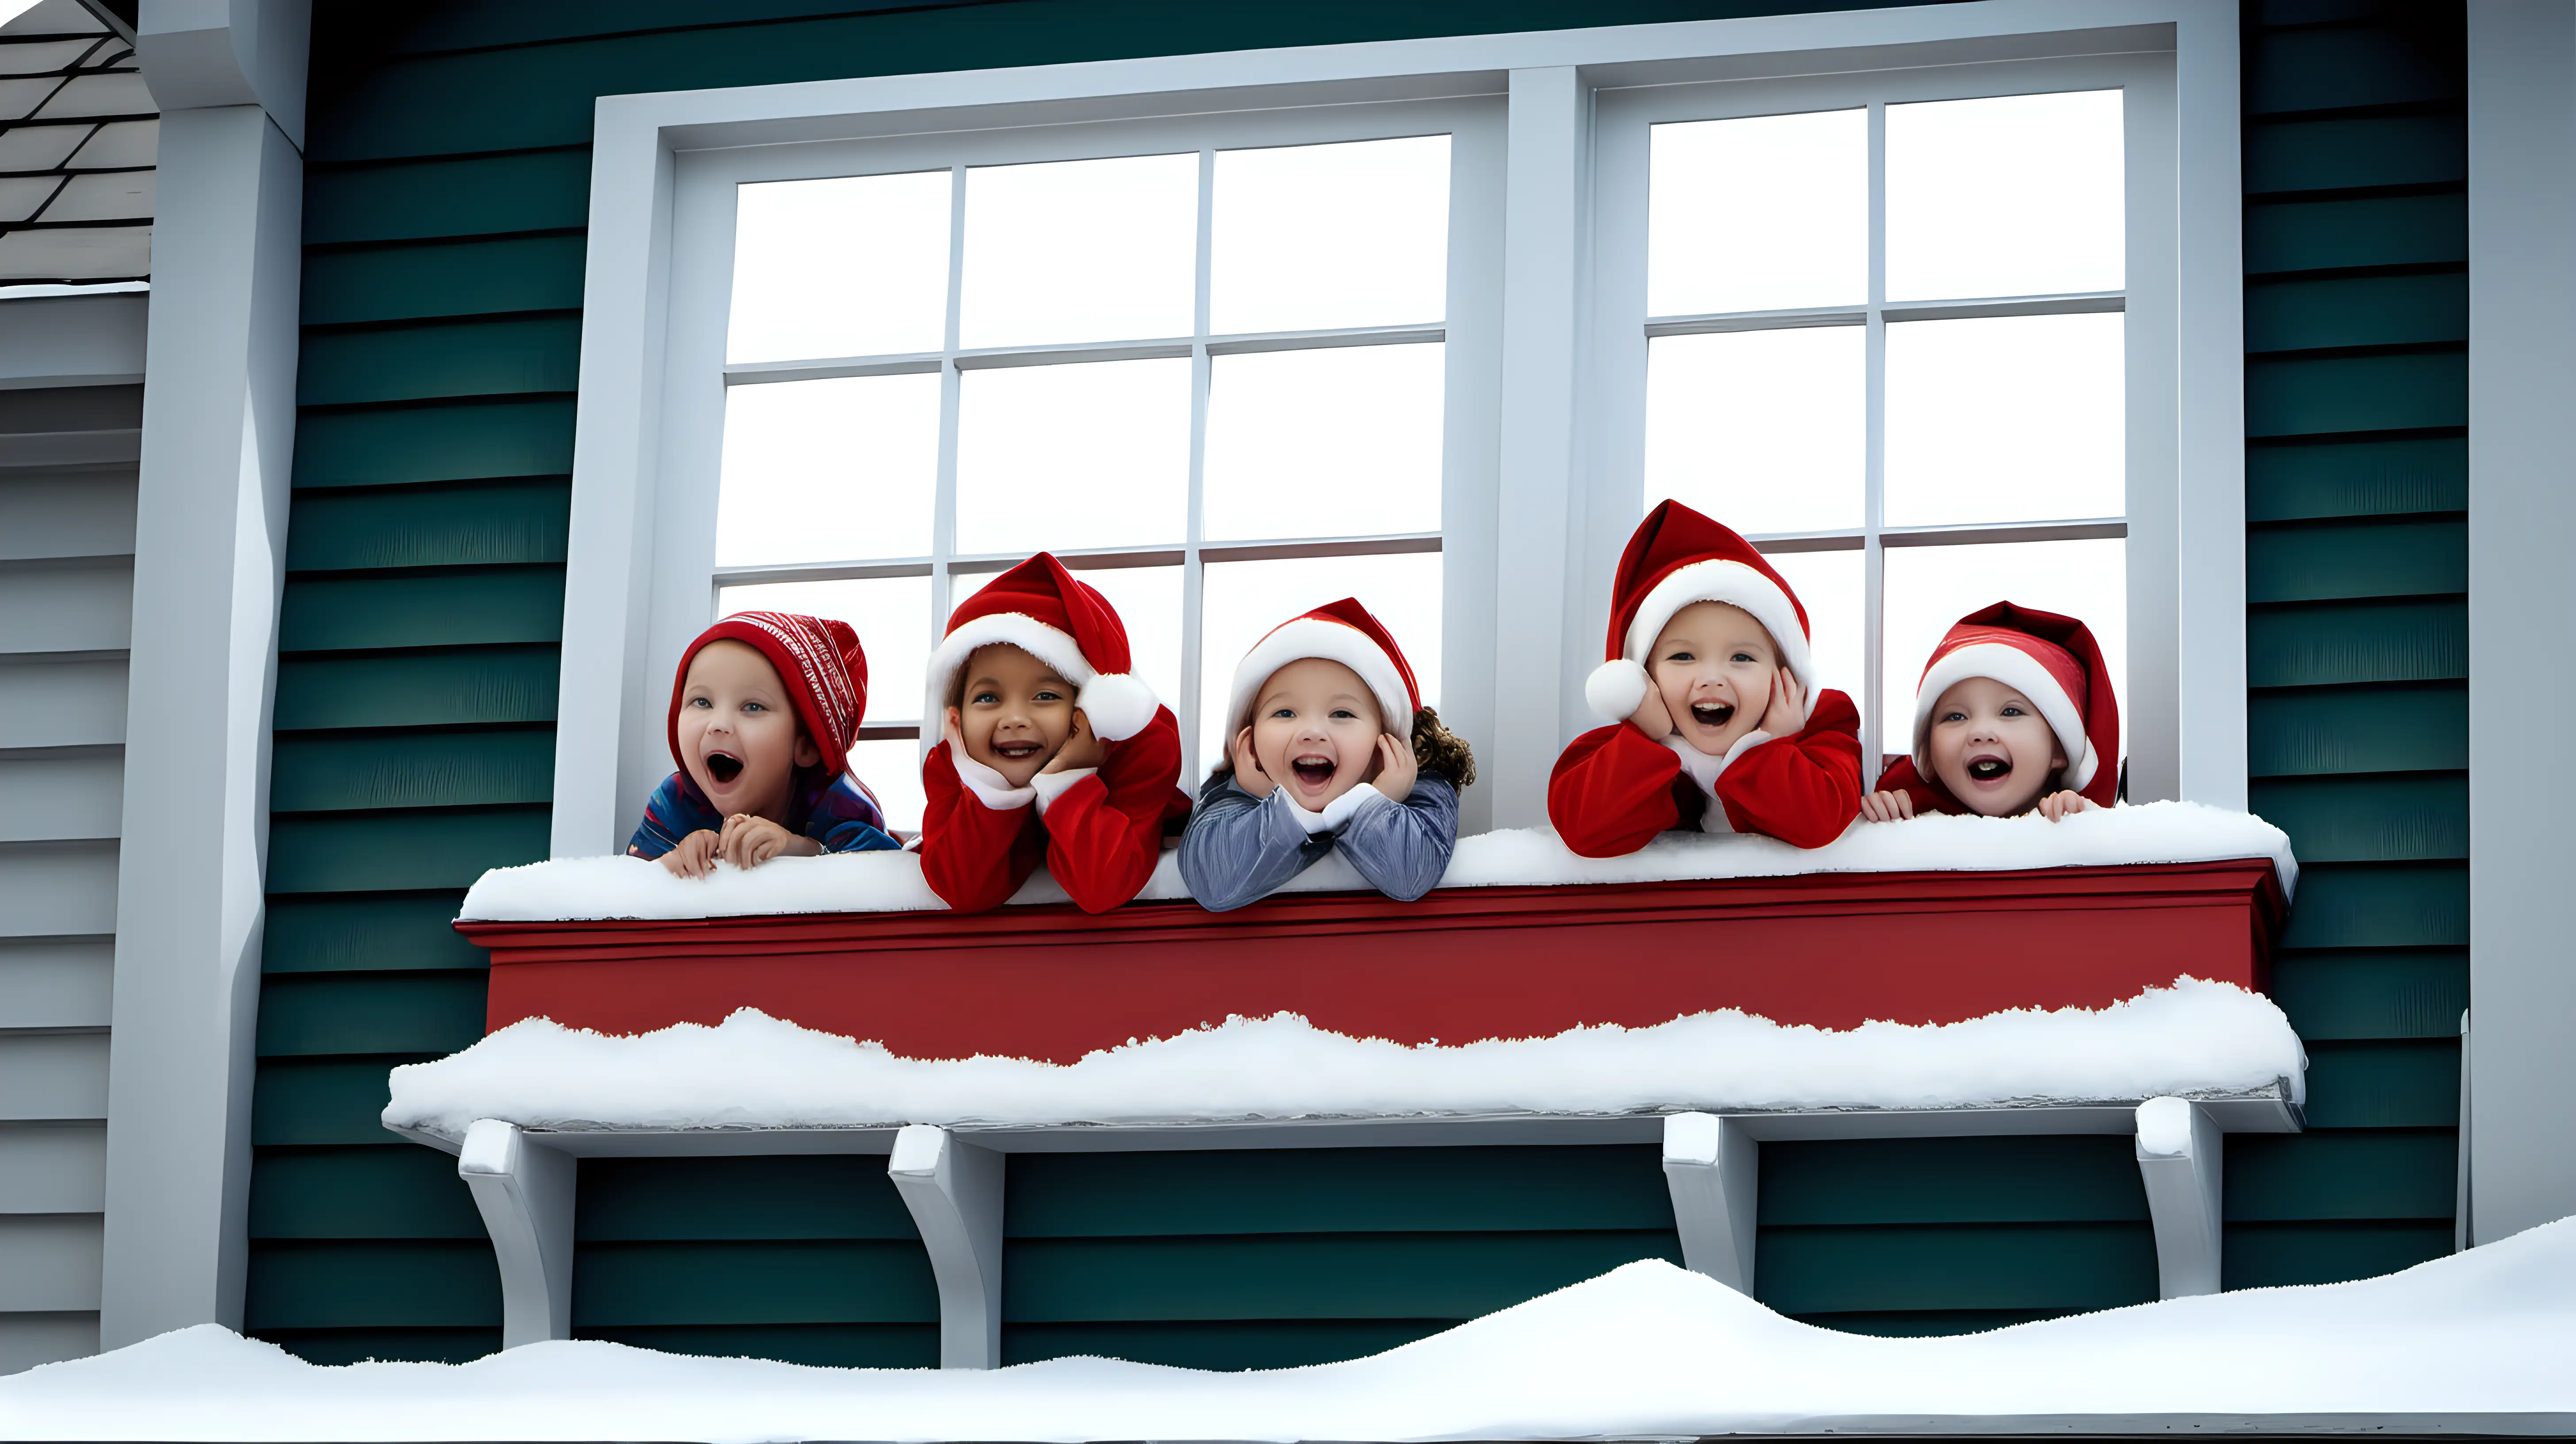 Children Excitedly Await Santas Arrival by the Snowy Window